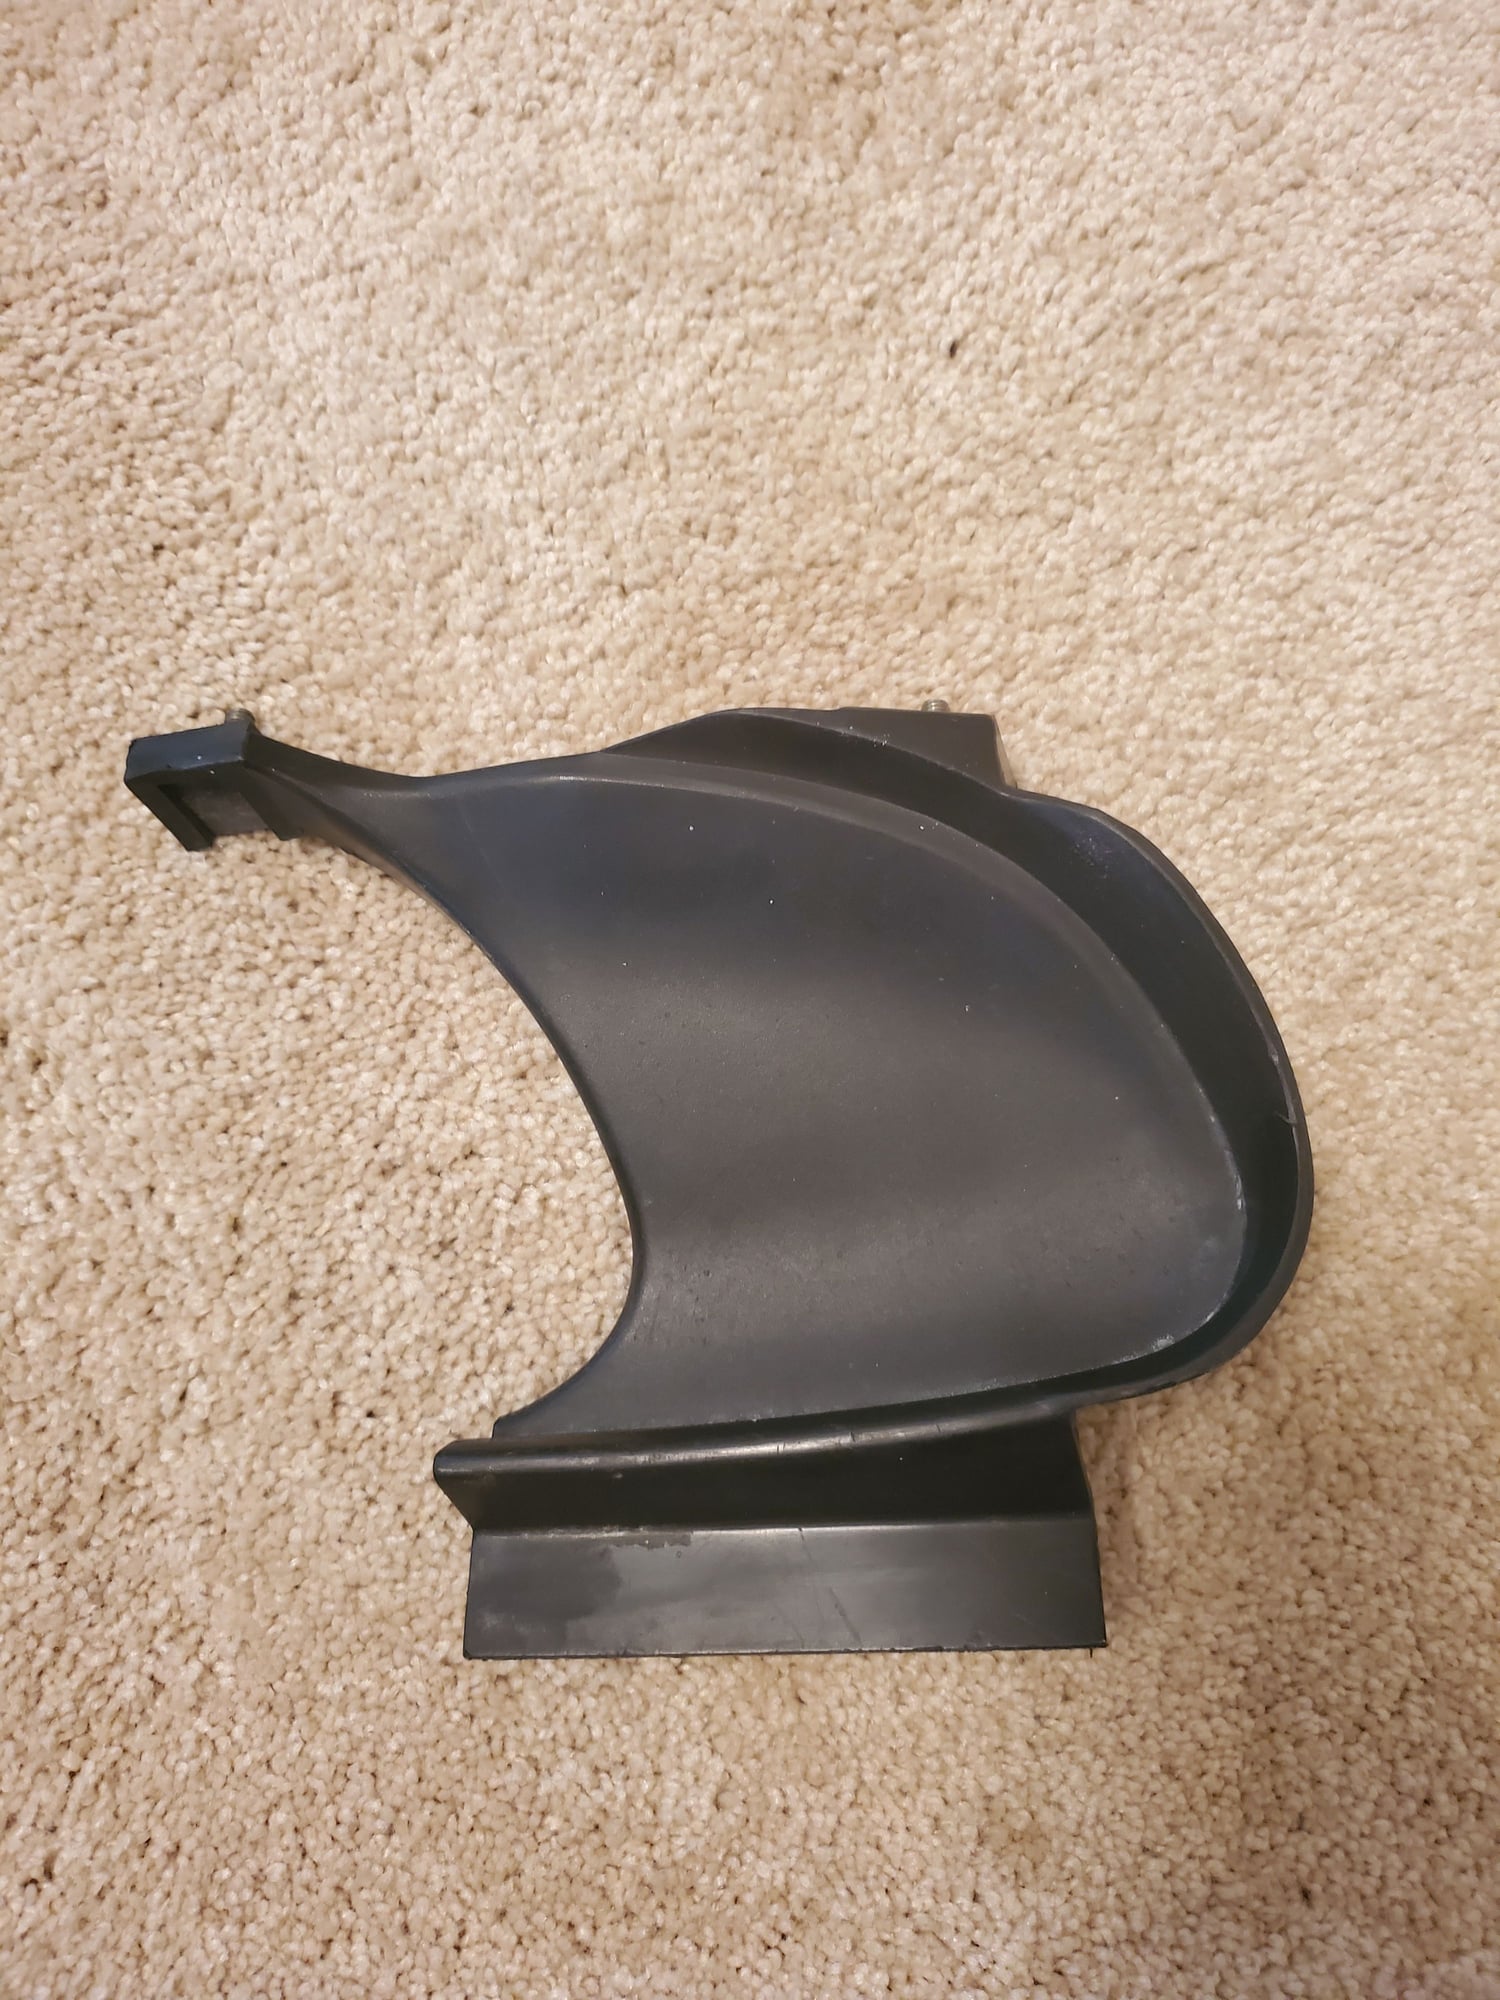 Miscellaneous - Garage Clean Out - Used - 1992 to 2002 Mazda RX-7 - Sugar Hill, GA 30024, United States